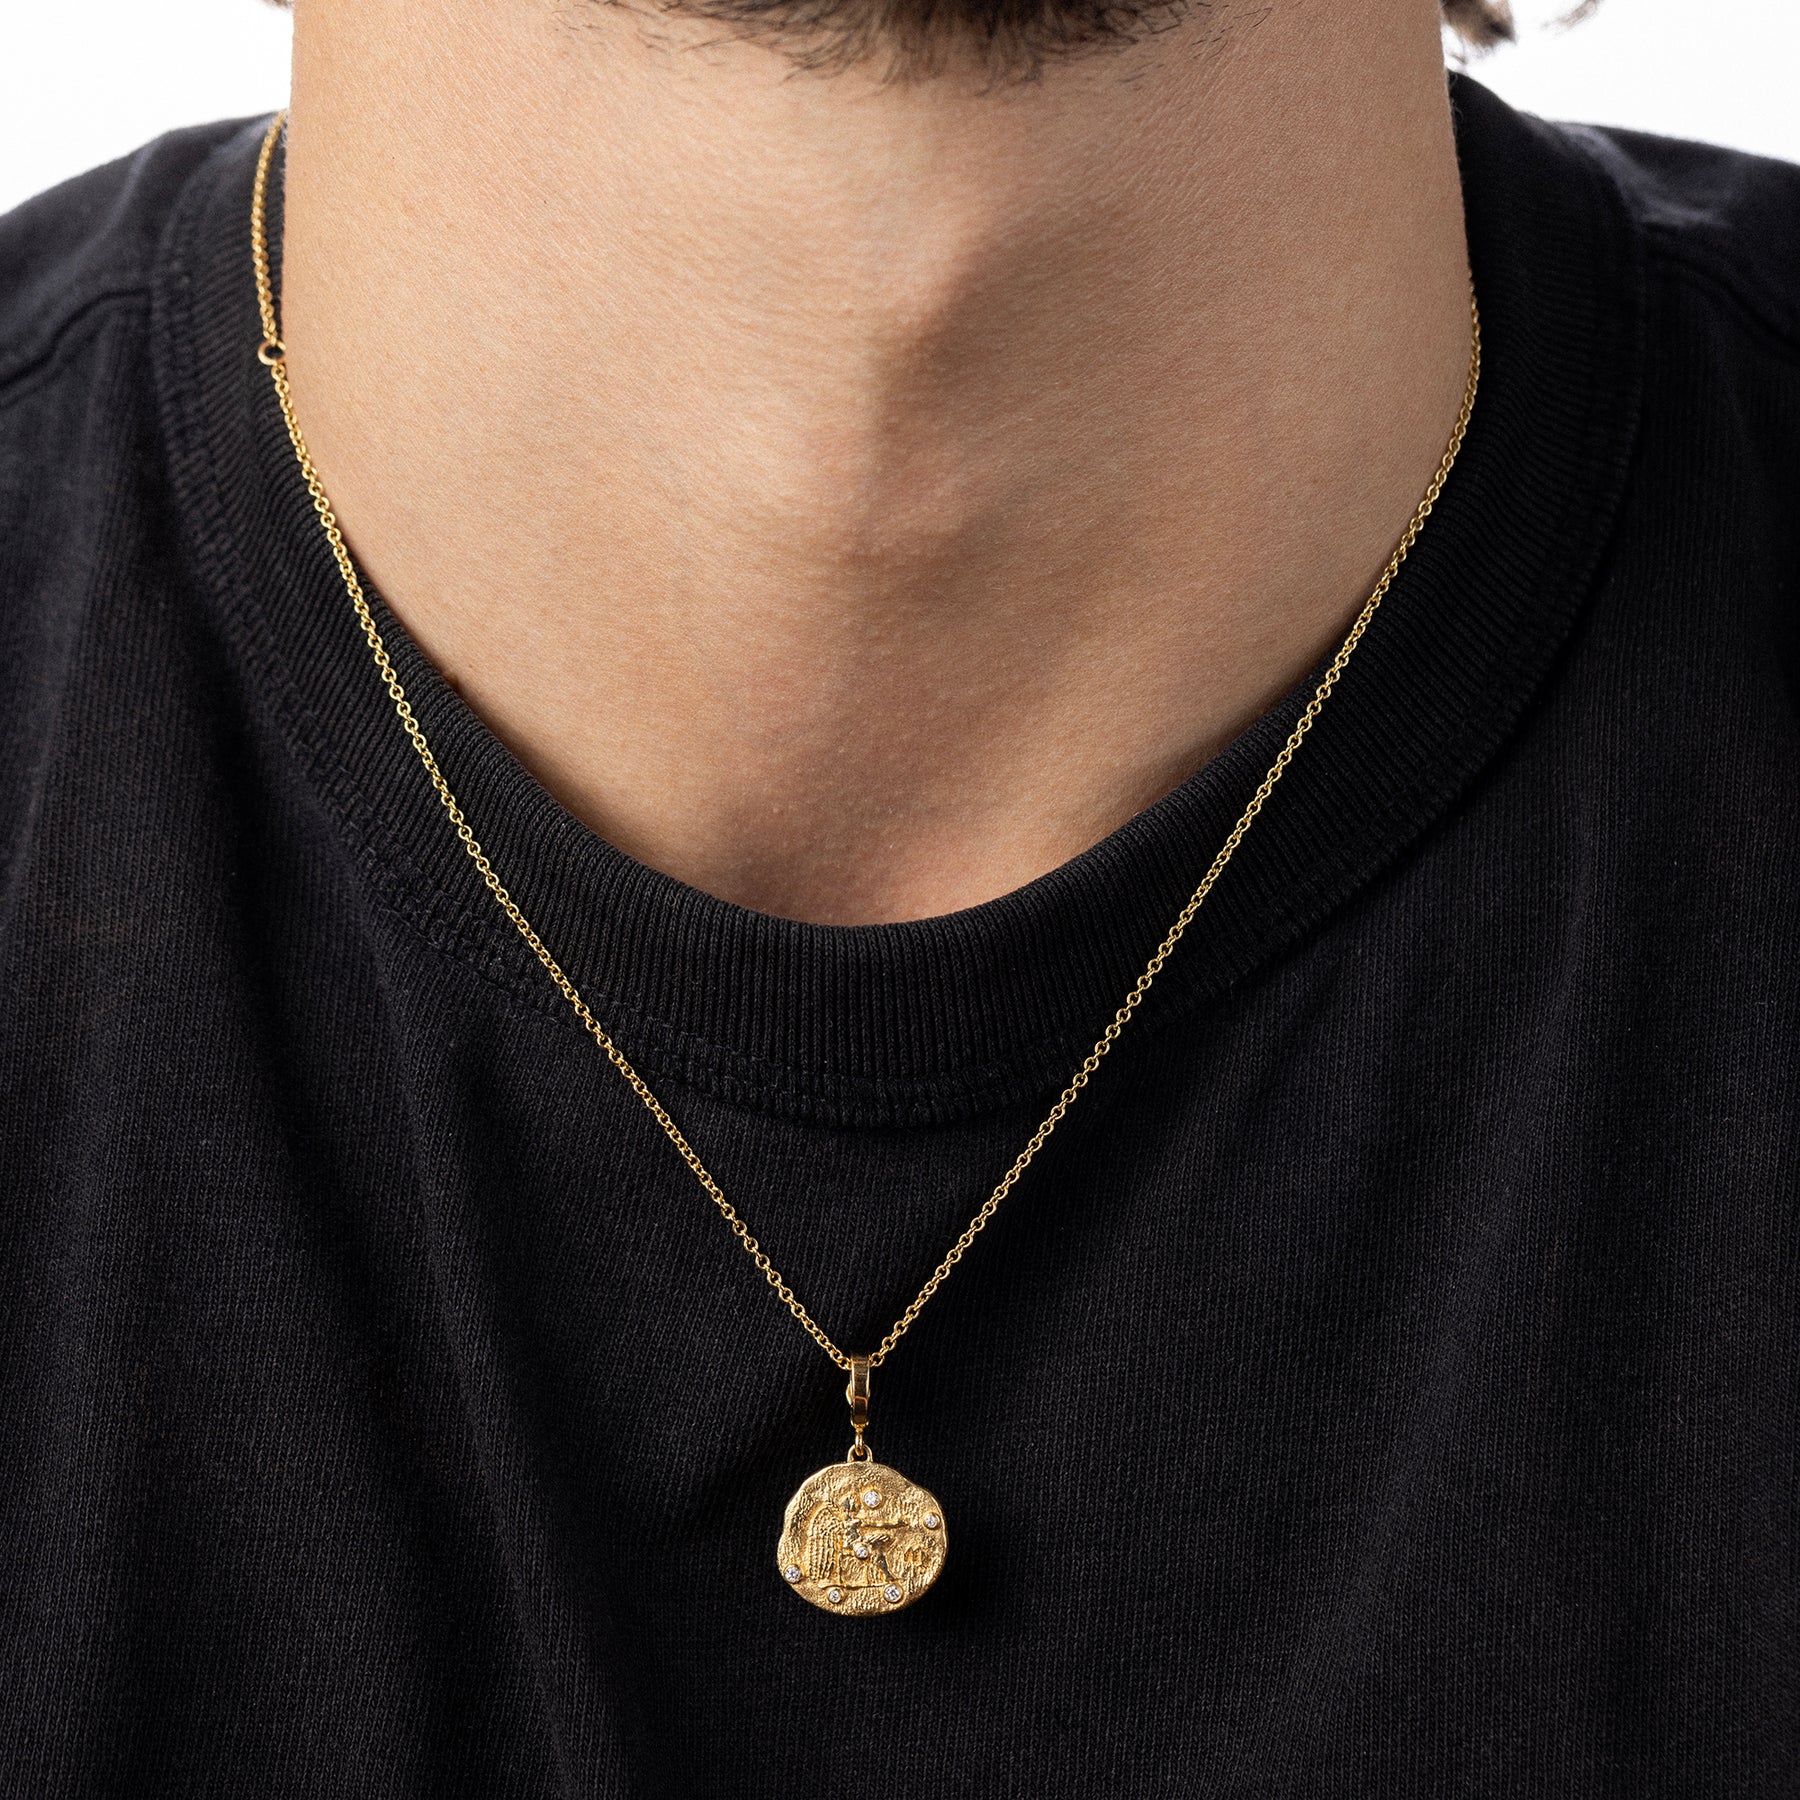 Of The Stars Taurus Small Coin Necklace